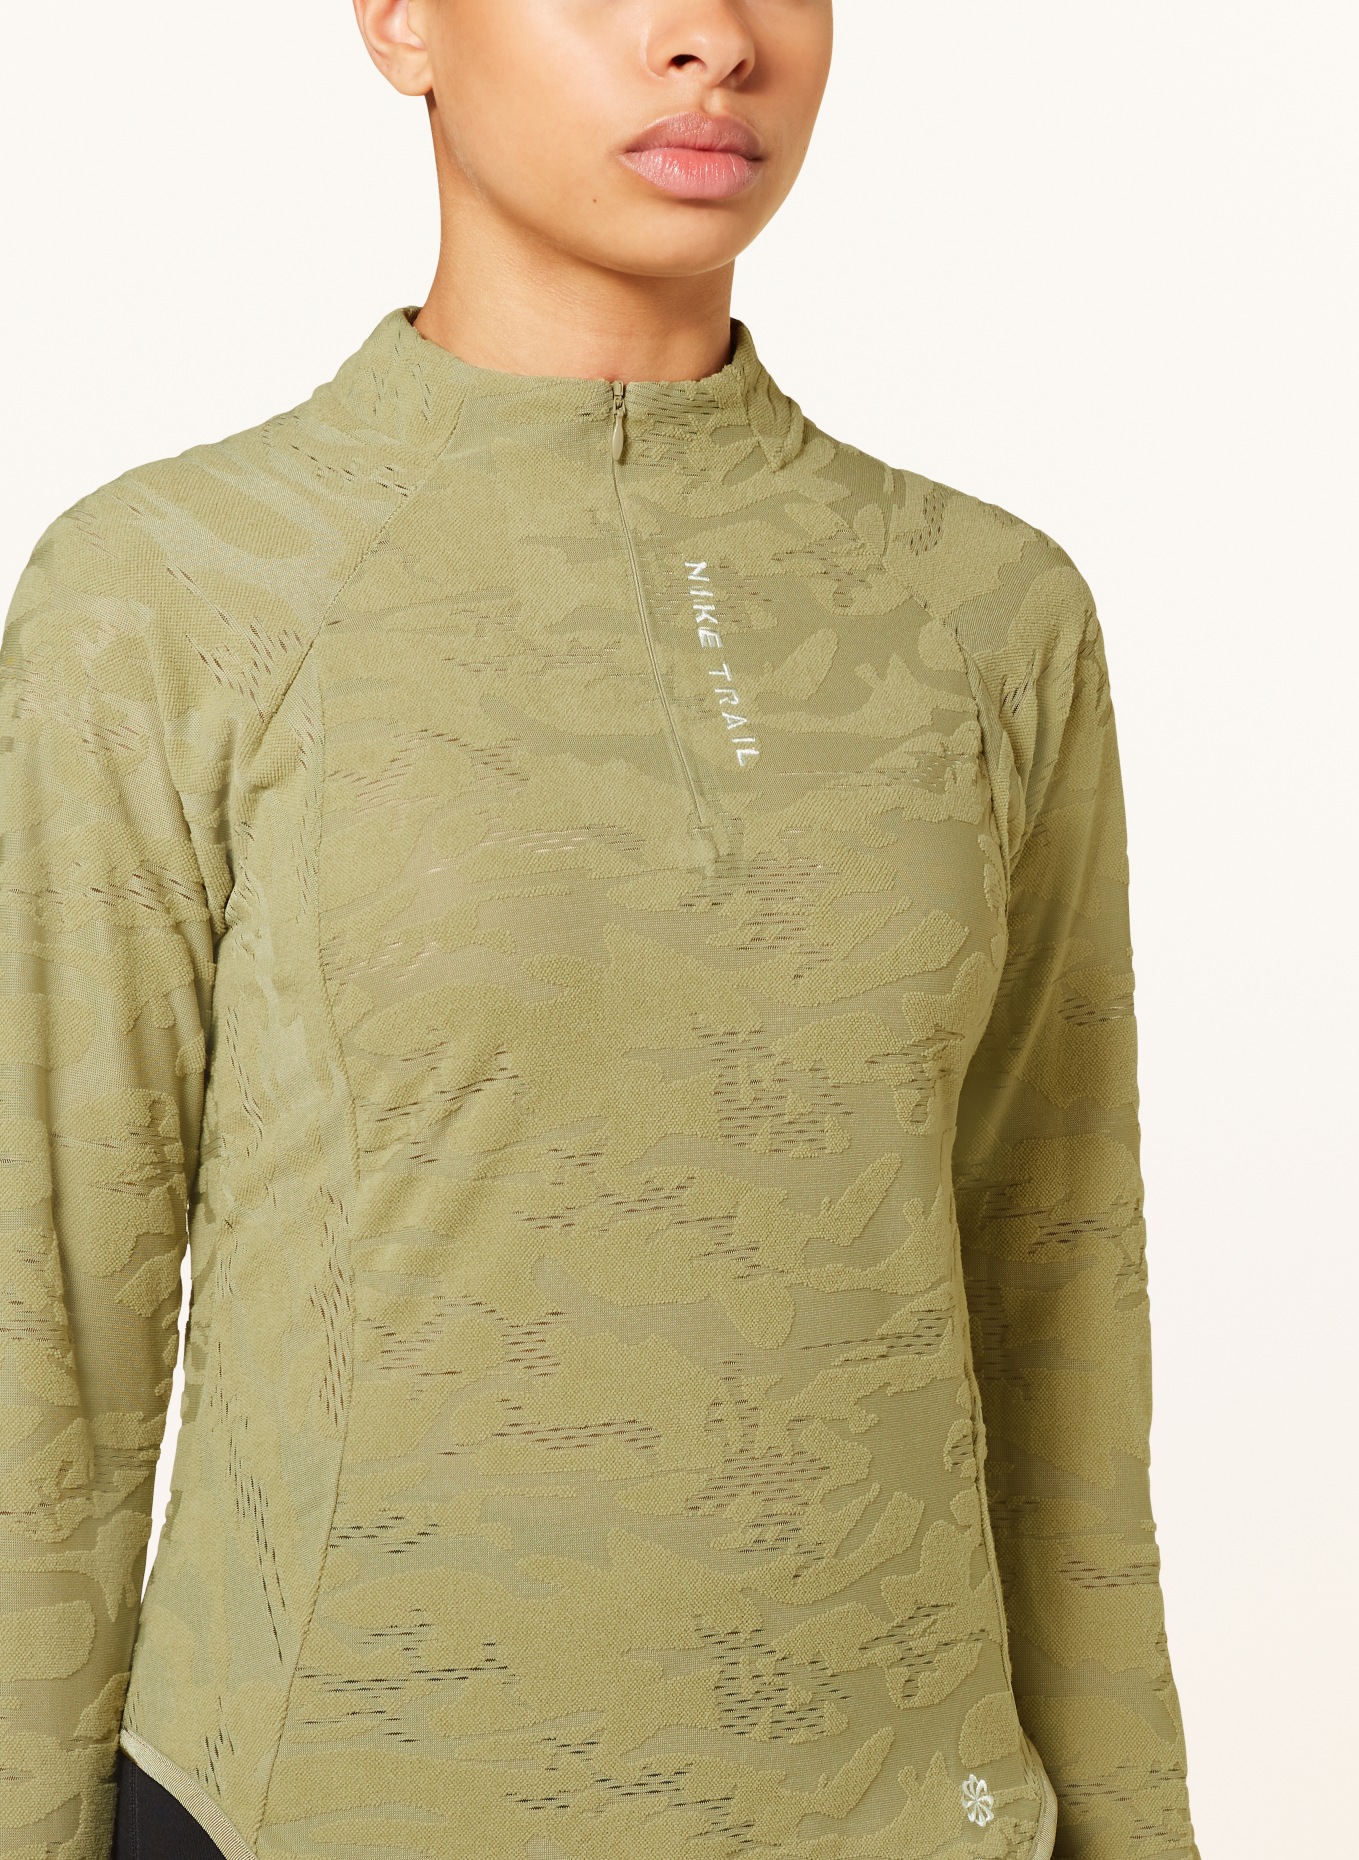 Nike Running shirt DRI-FIT TRAIL, Color: OLIVE (Image 4)